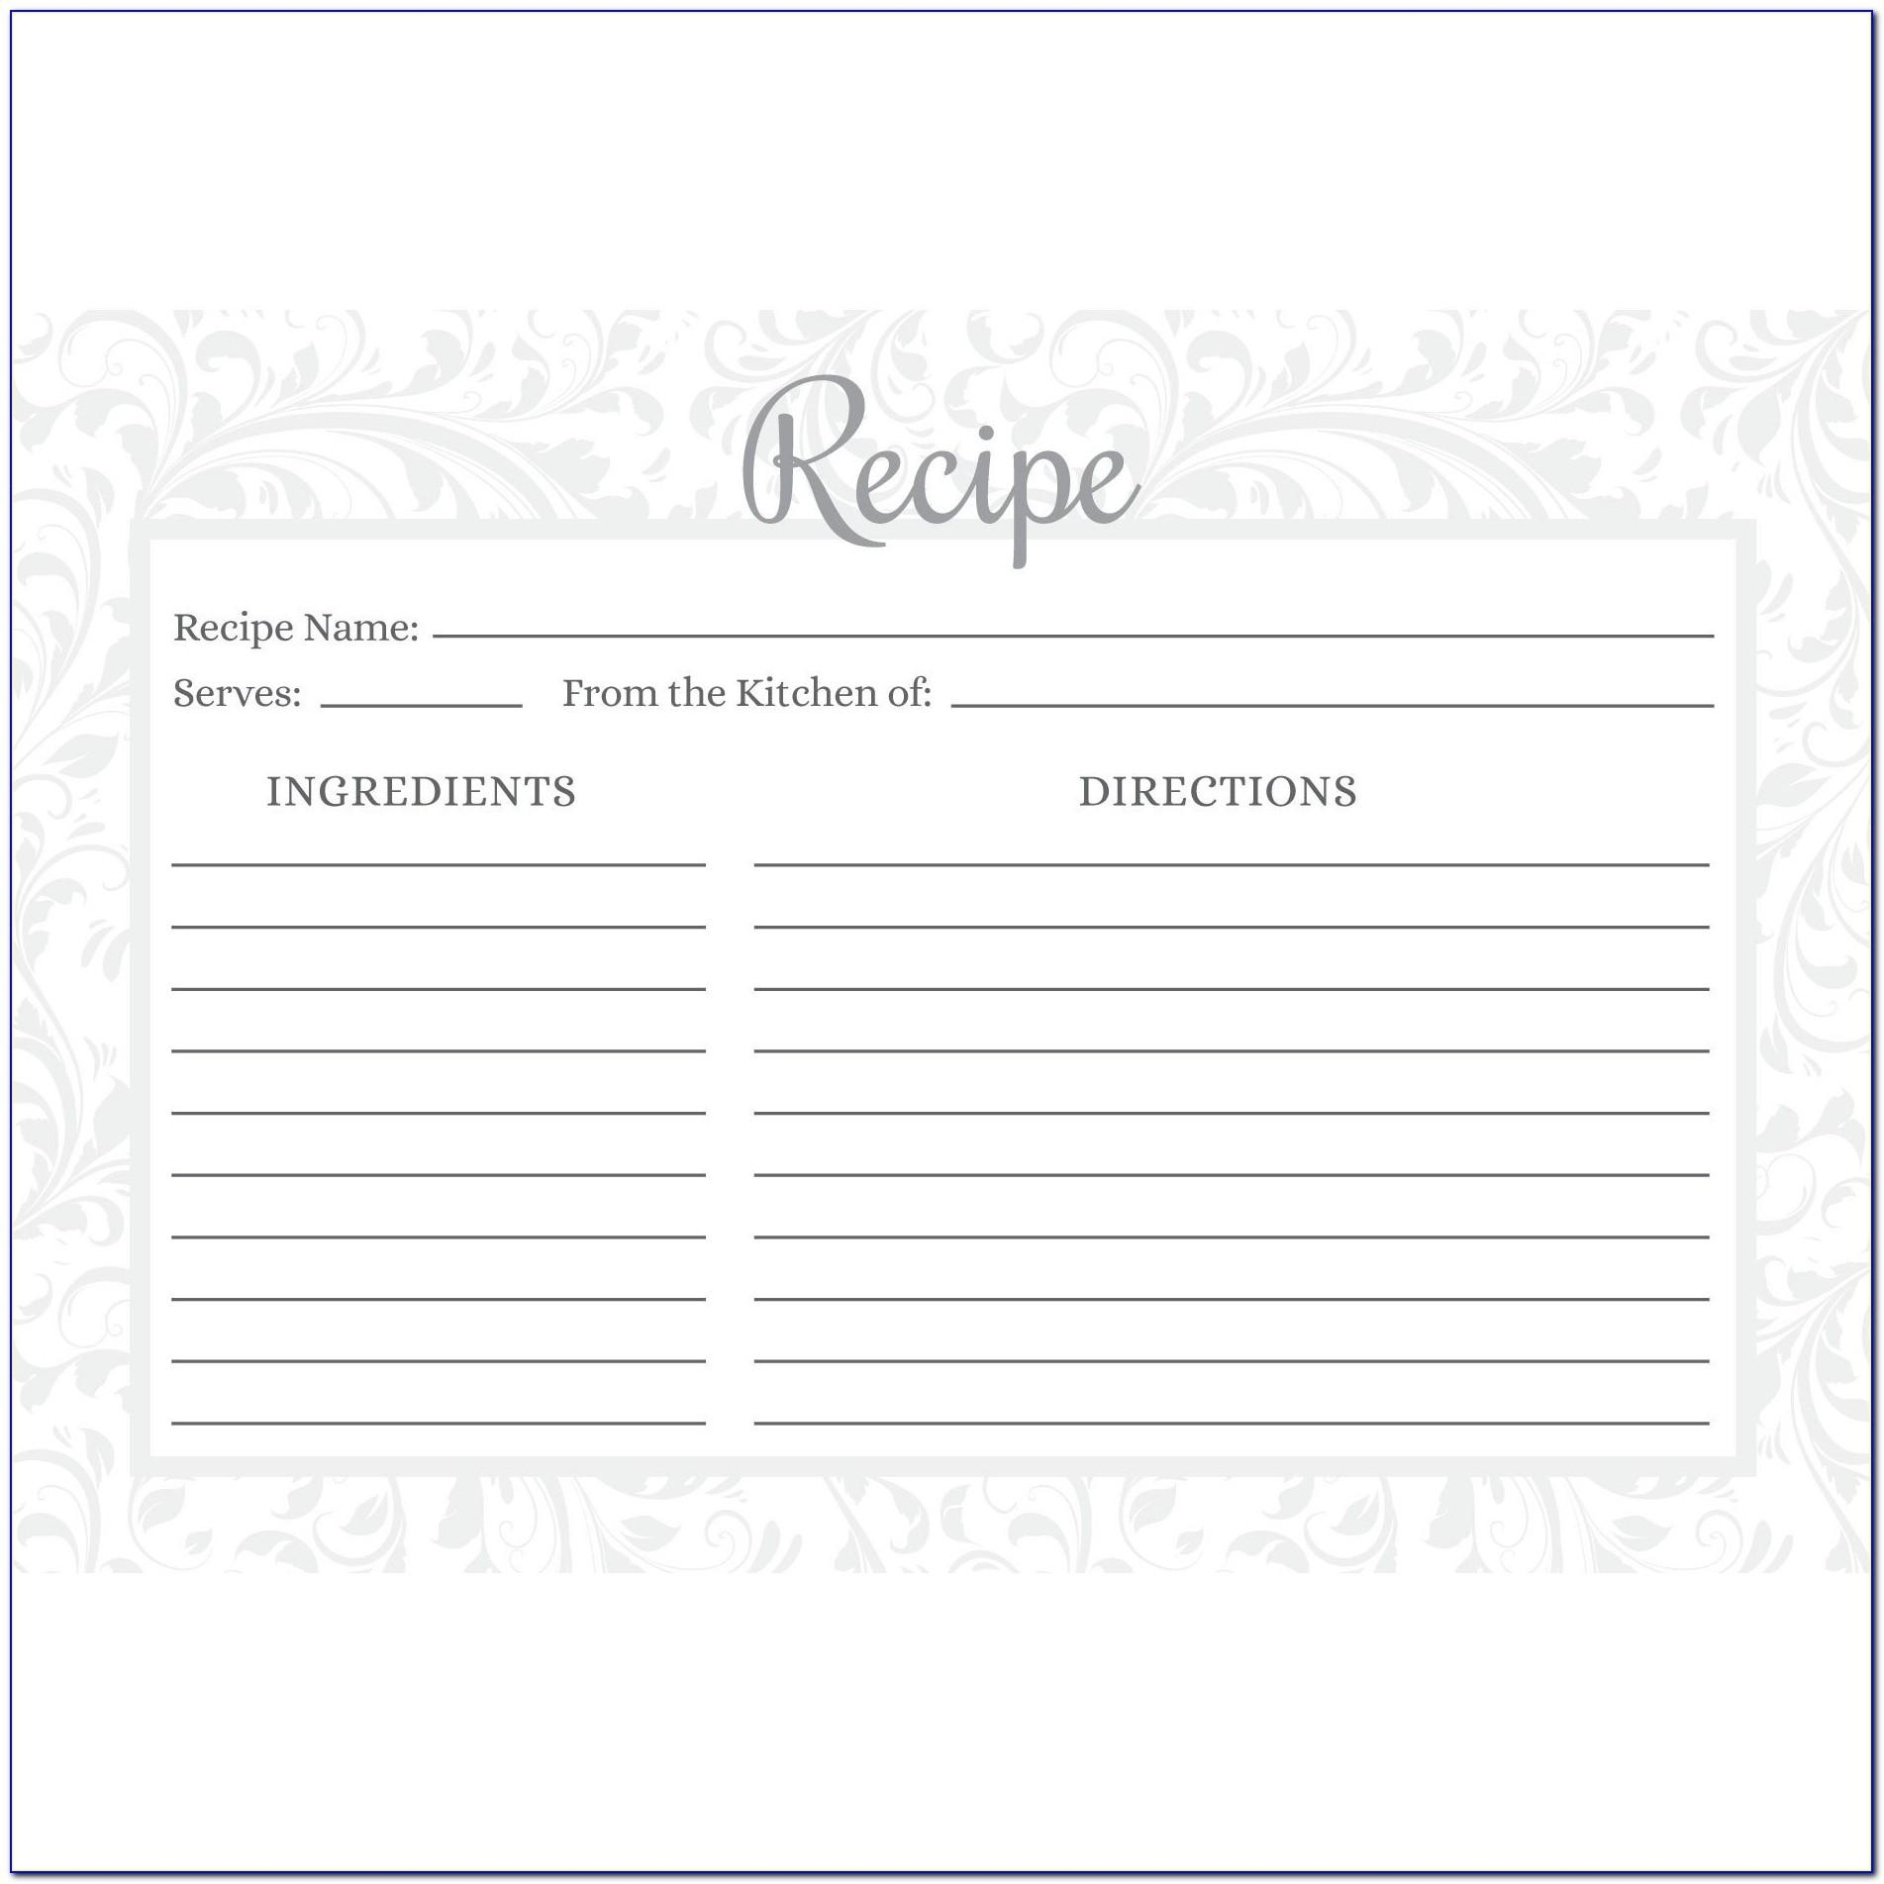 4X6 Recipe Templates For Microsoft Word : Free Recipe Card Template Recipe Cards Template Recipe Regarding Free Recipe Card Templates For Microsoft Word